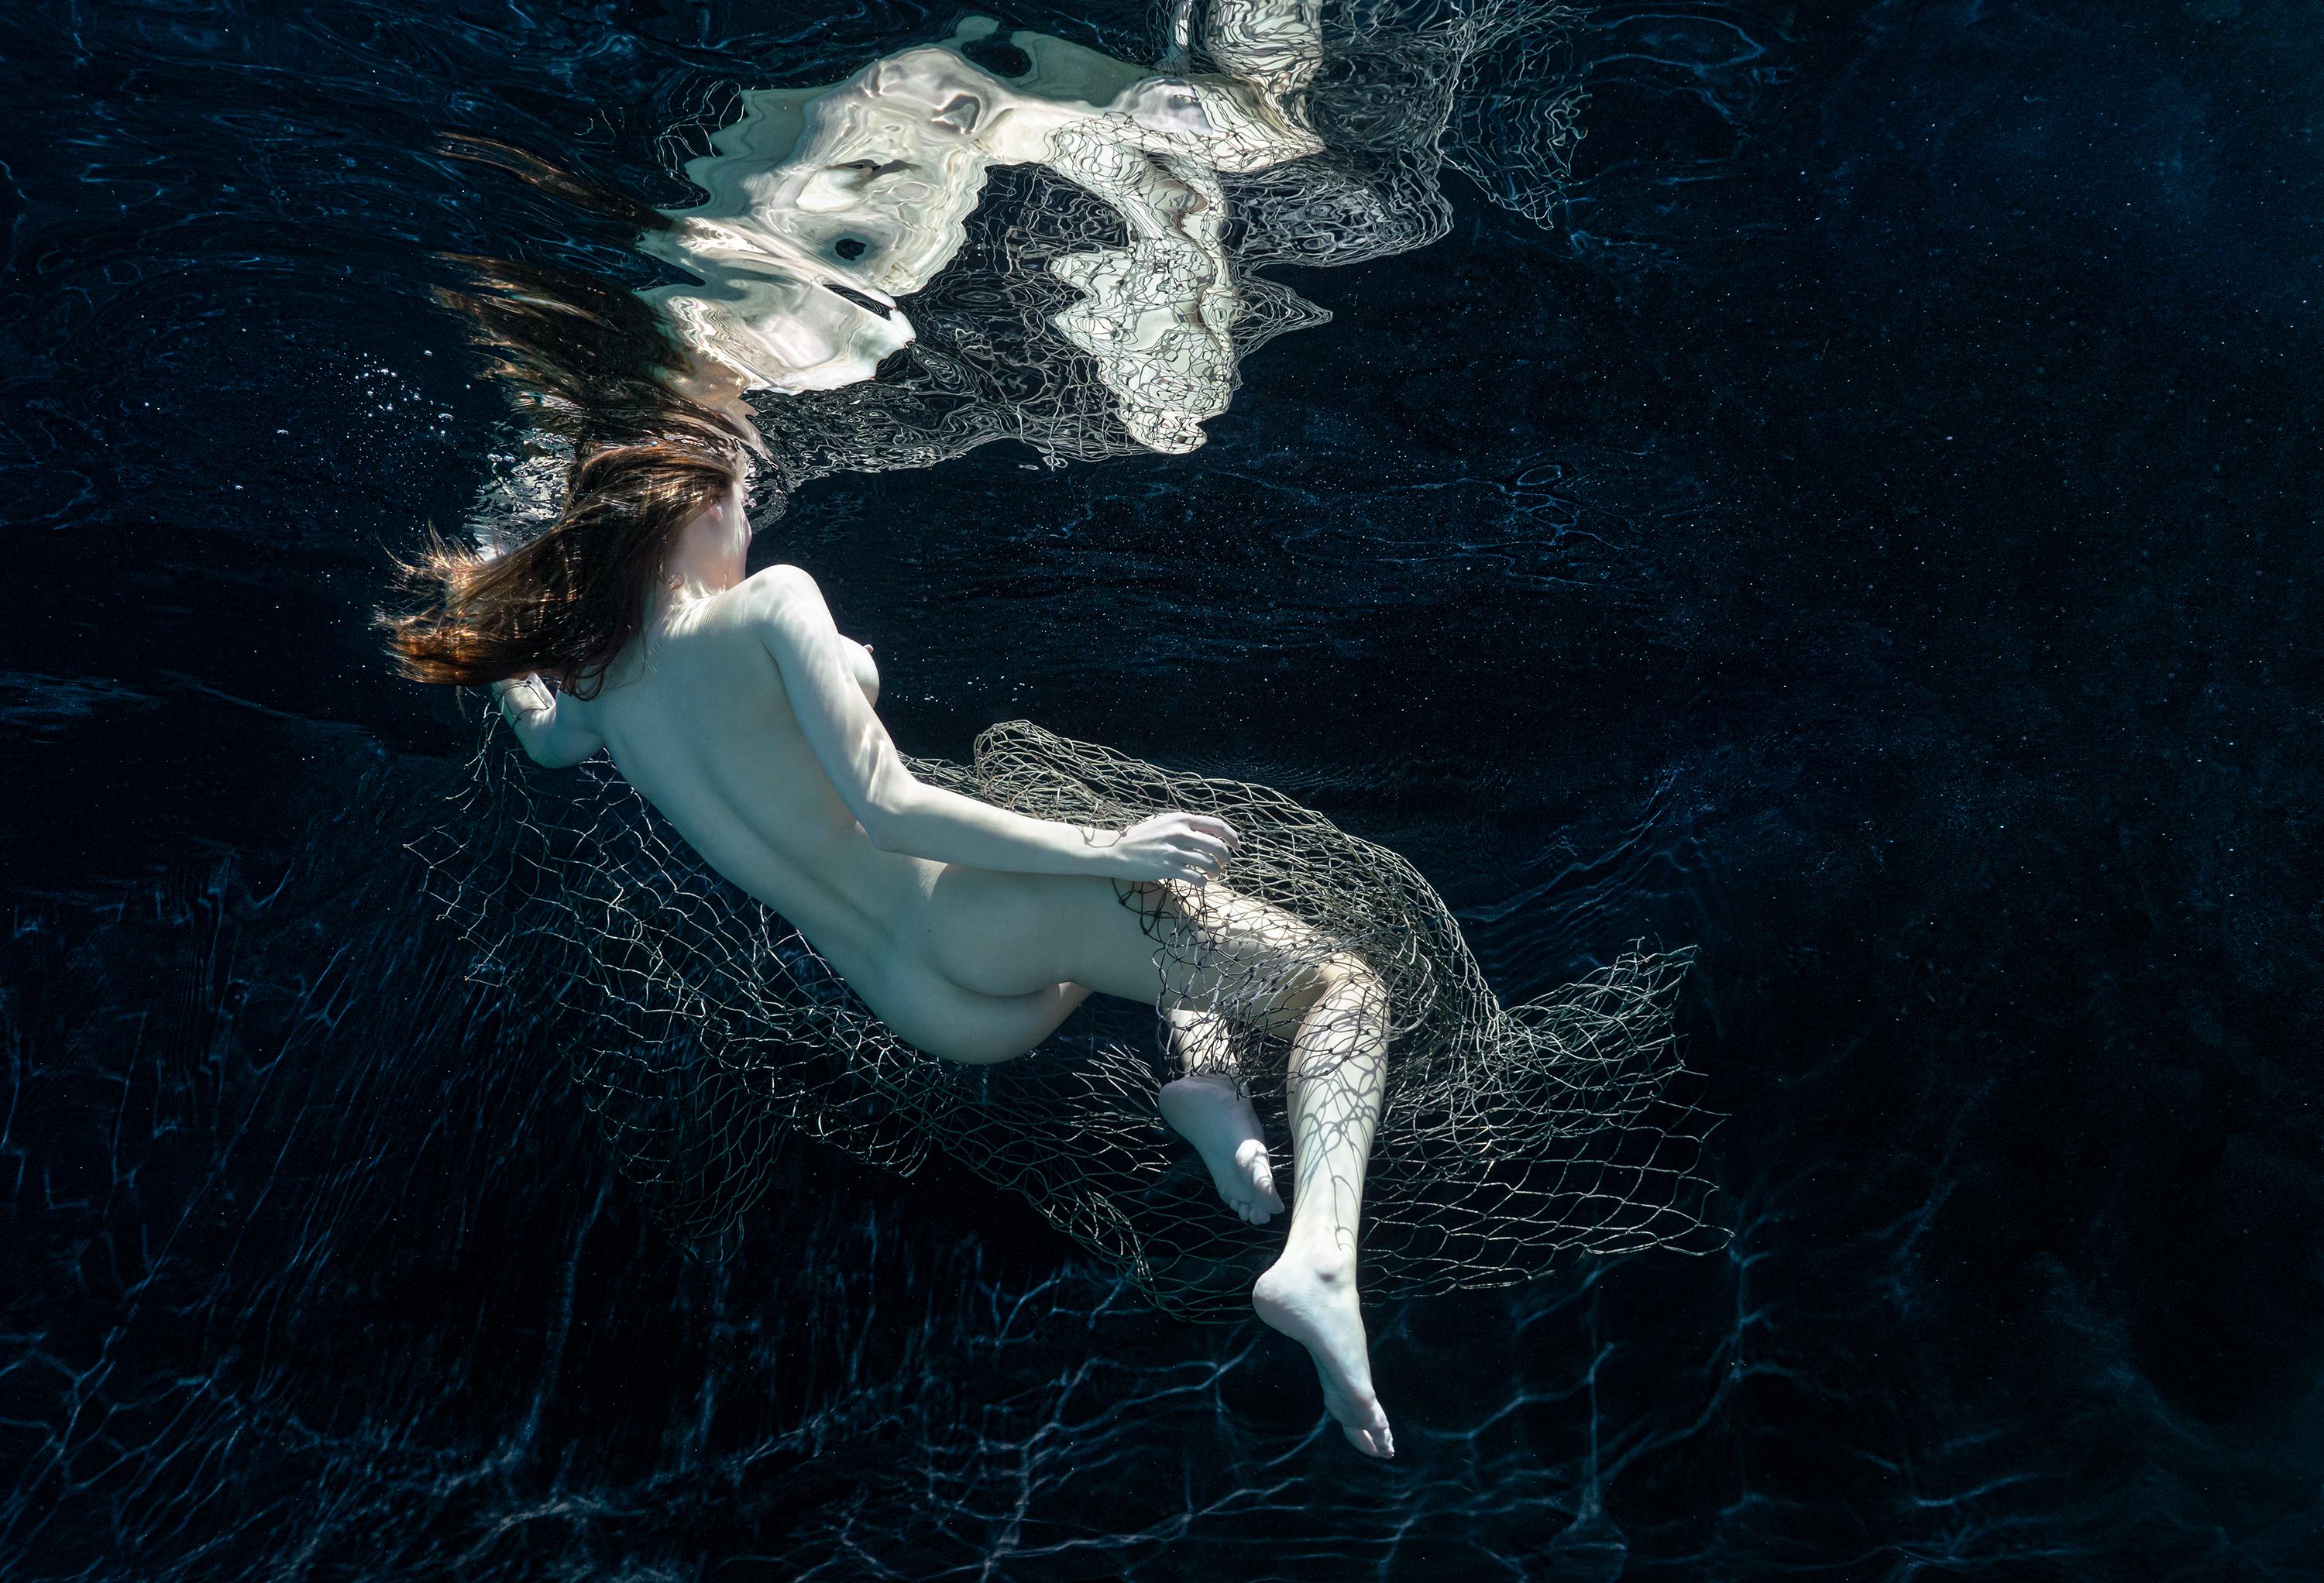 Alex Sher Nude Photograph - Constellation - underwater nude photograph - archival pigment print 24x35"